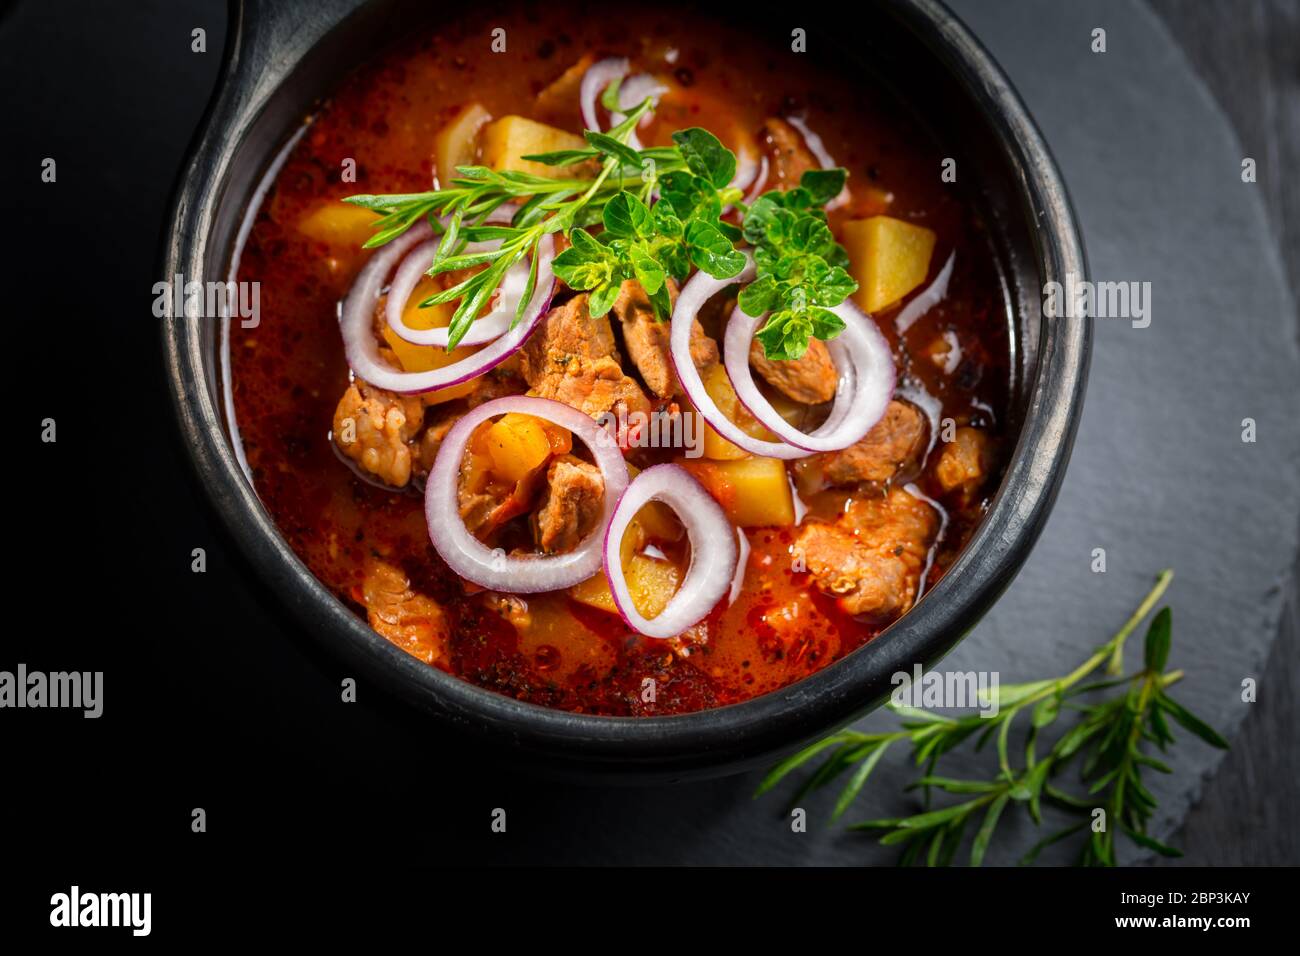 Traditional Hungarian goulash - stew of meat and vegetables with onions and herbs Stock Photo